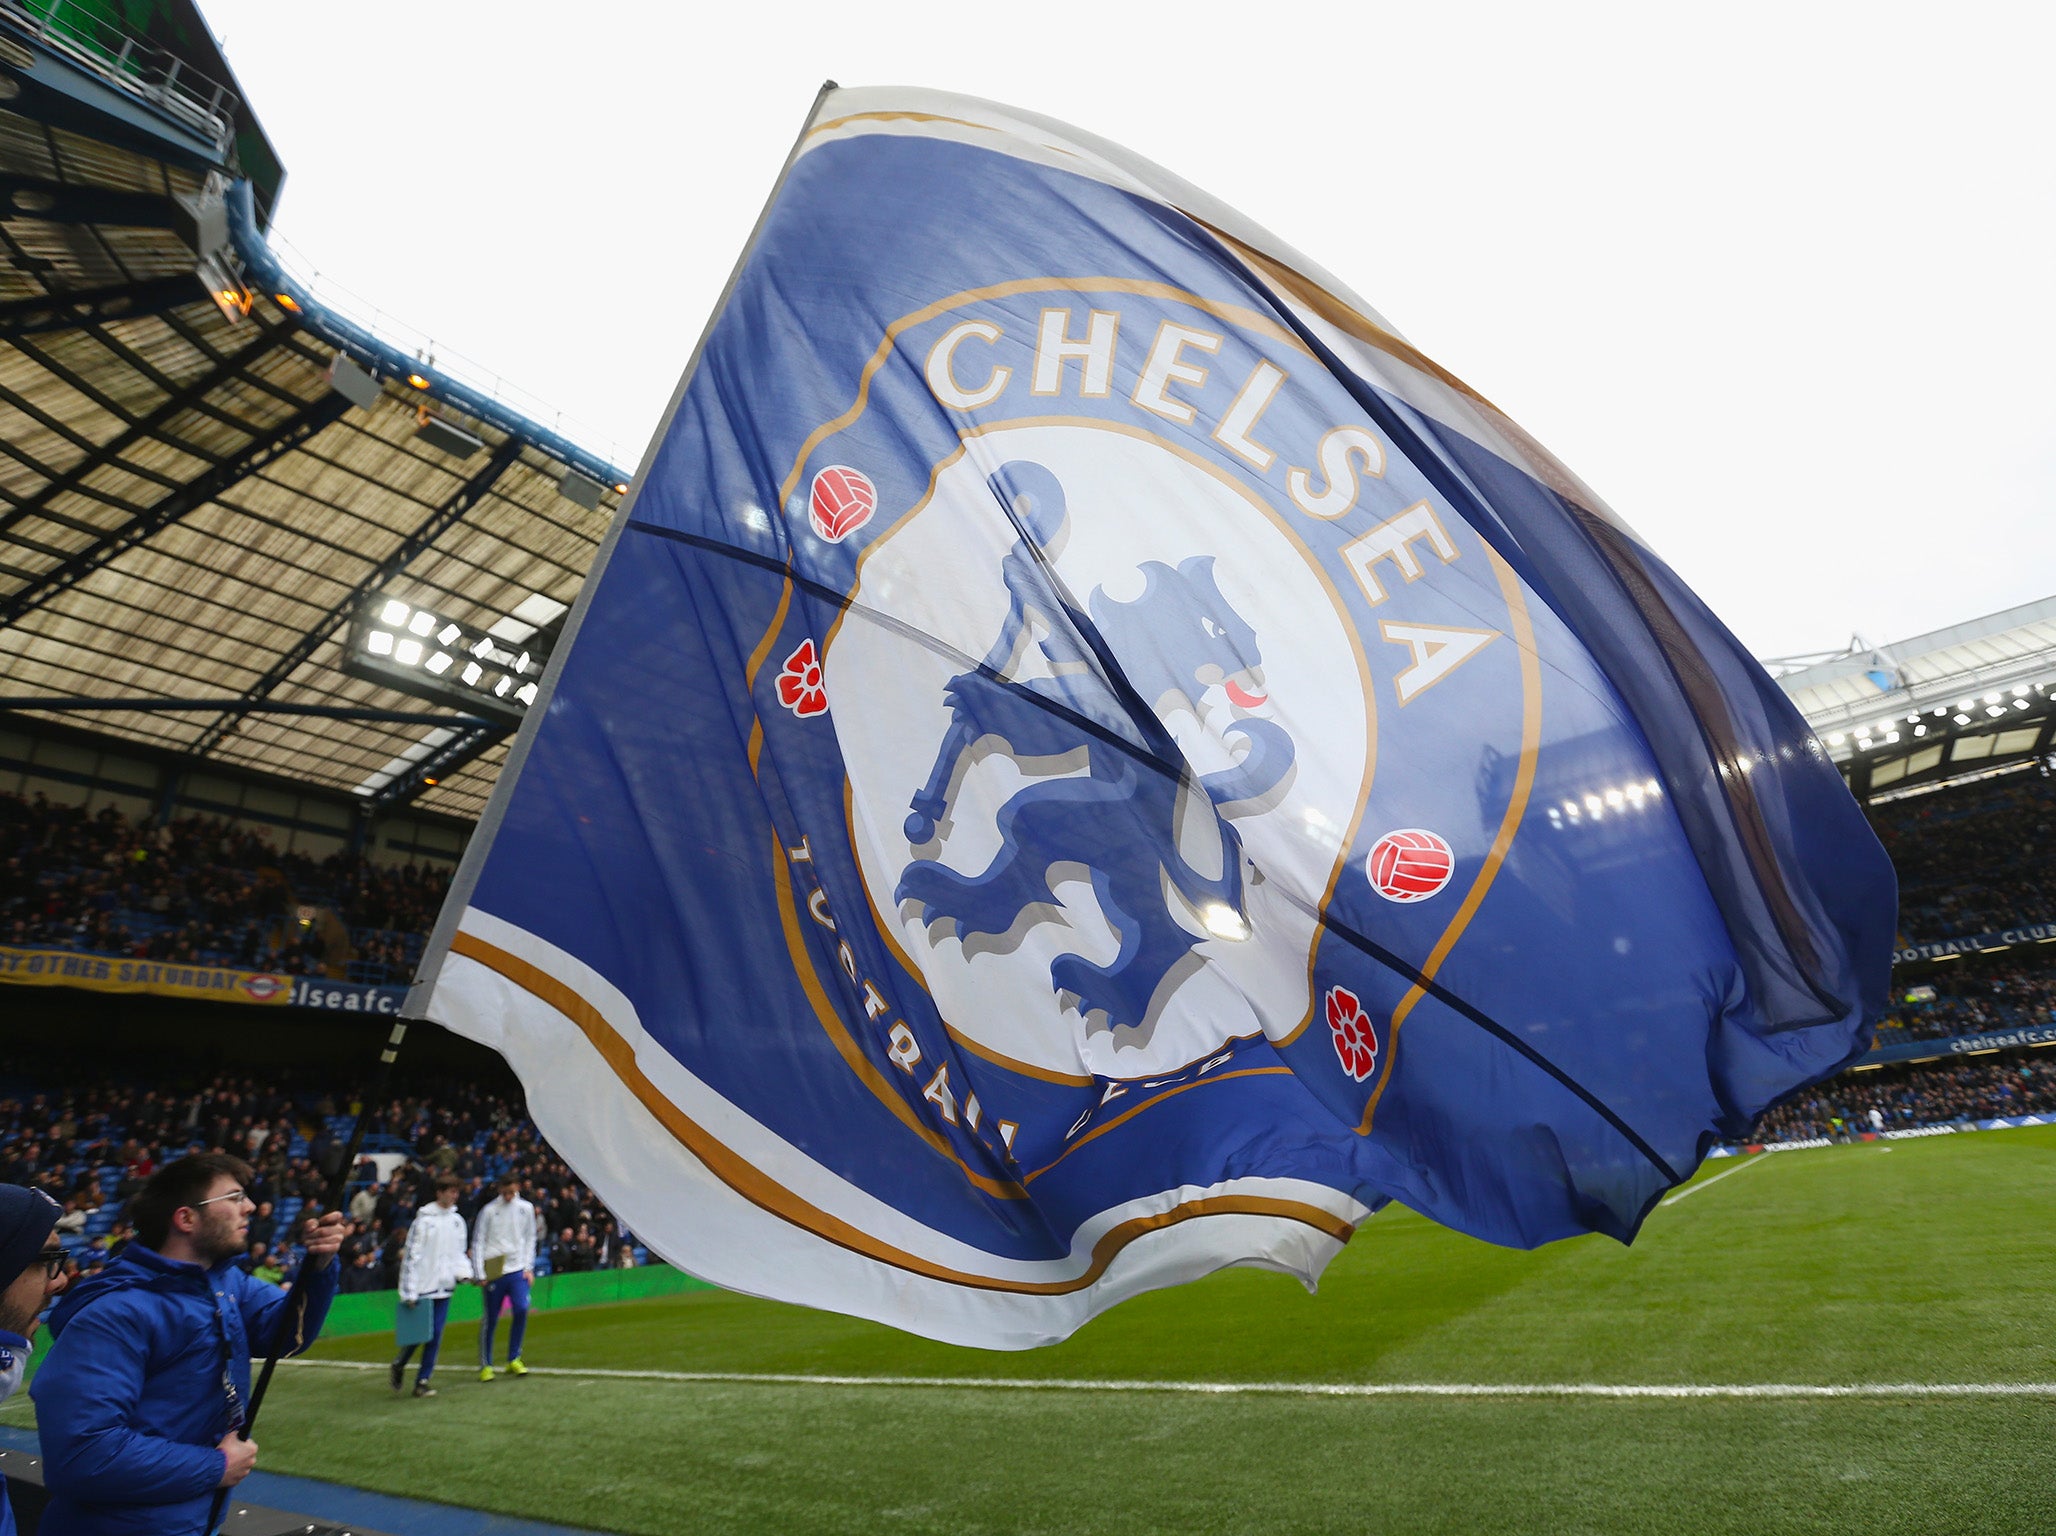 If sanctioned, Chelsea could appeal to Fifa itself and to CAS